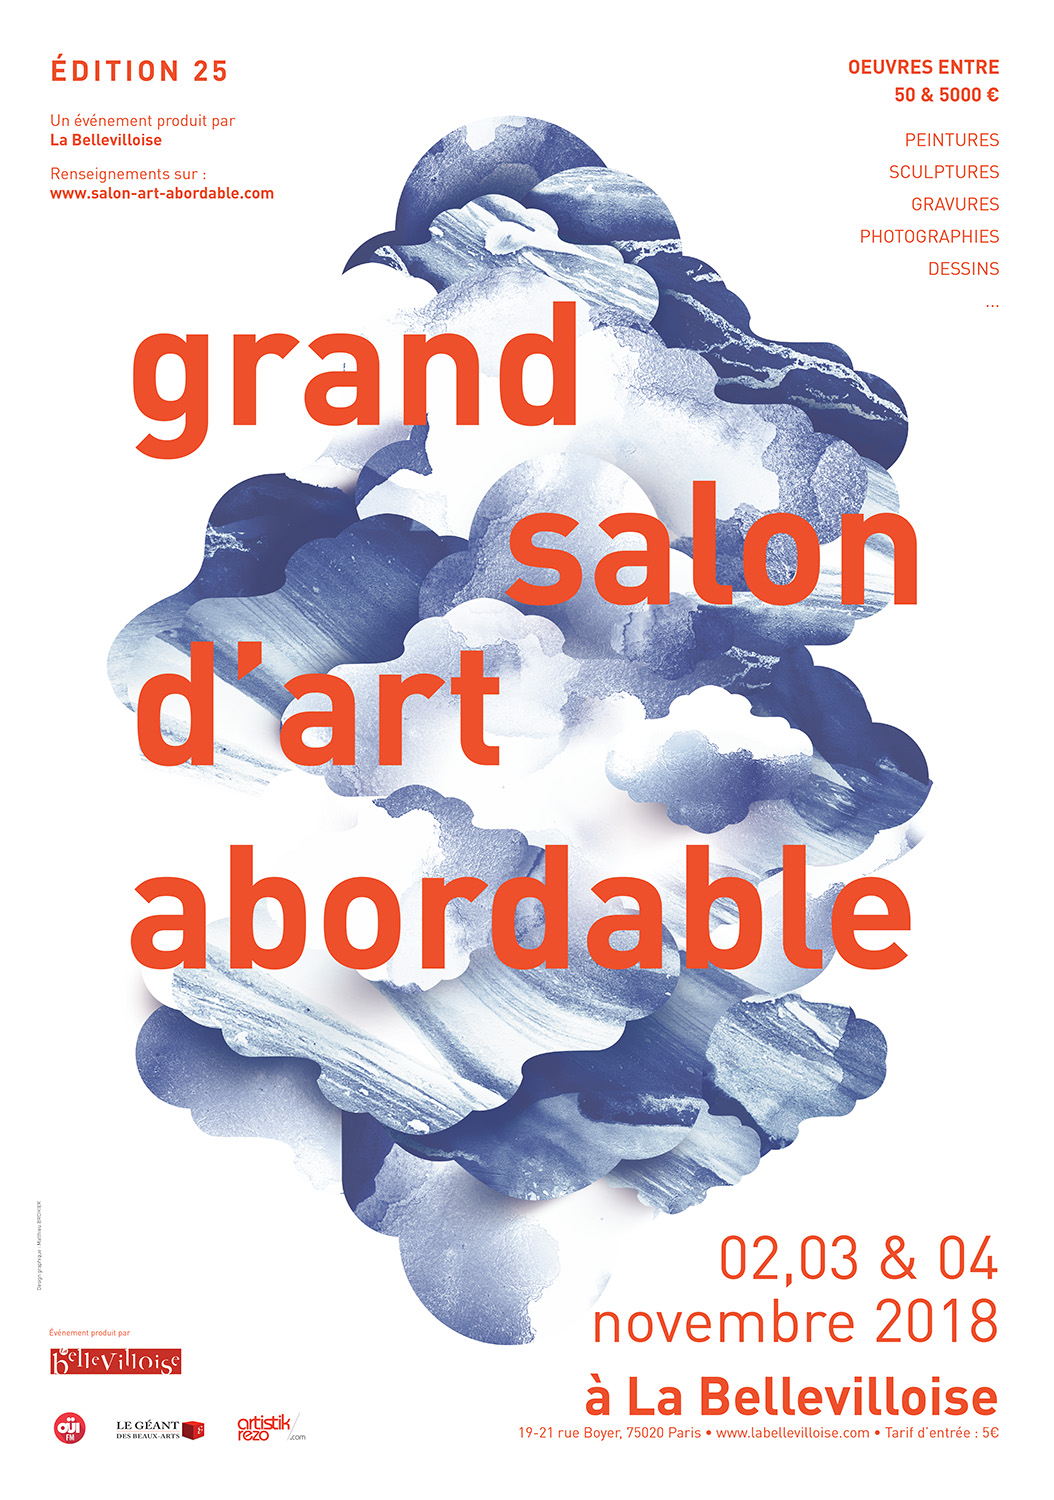 Affiche A1-Edition 24.indd